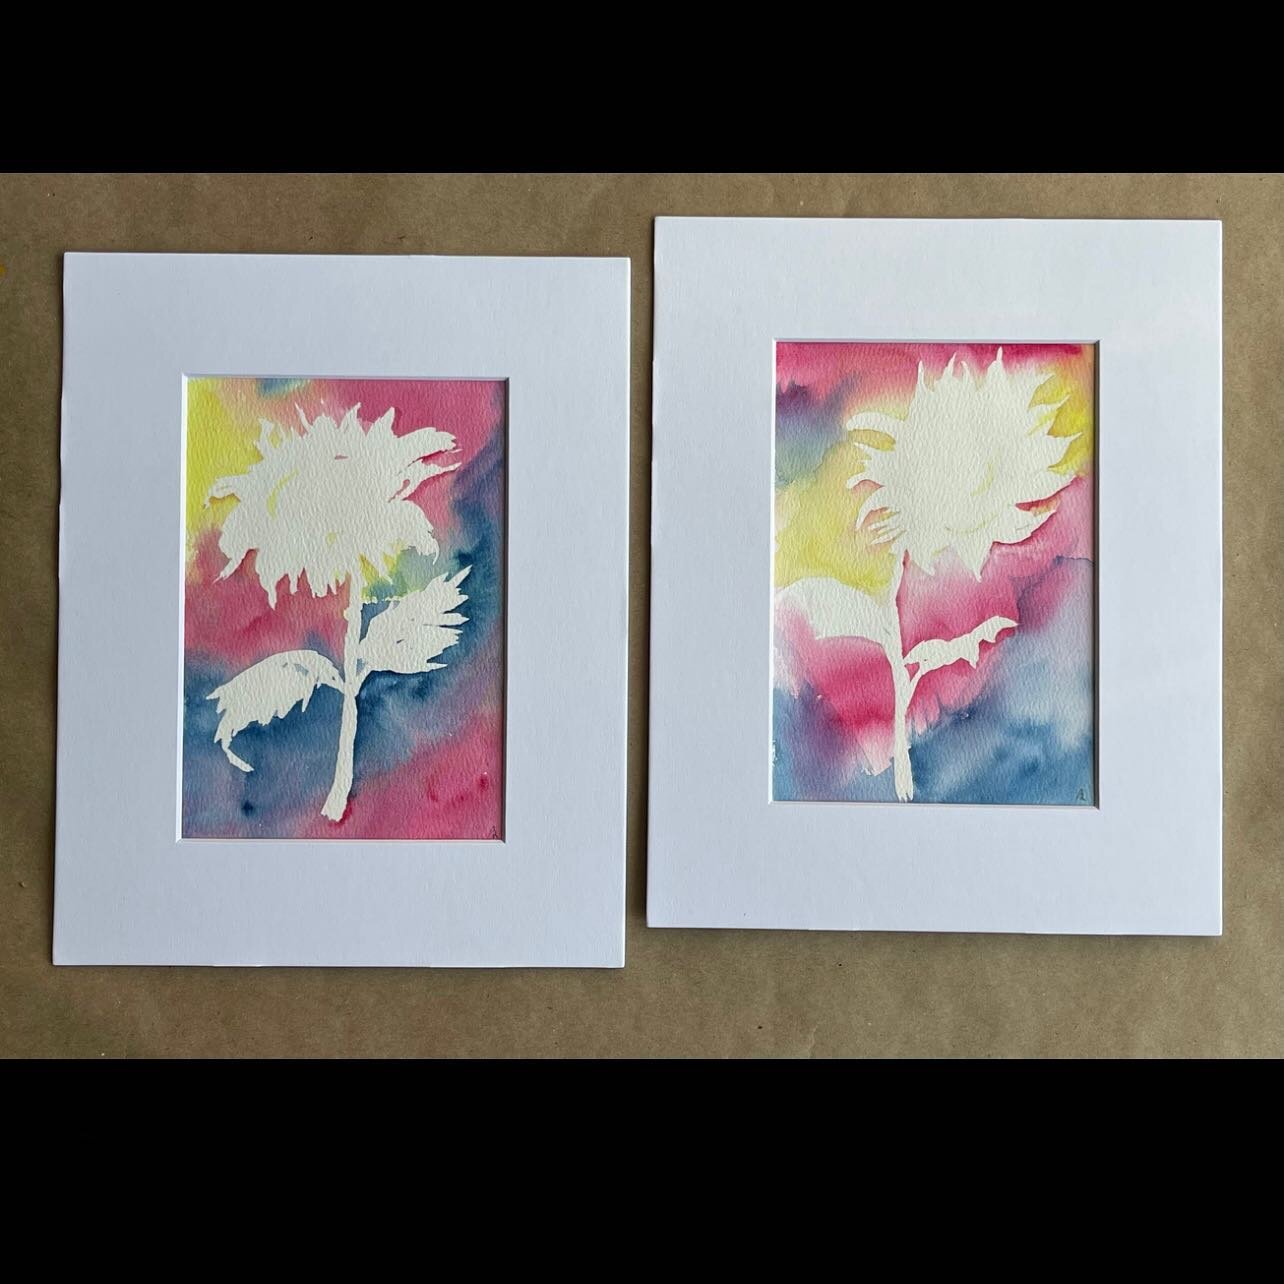 🟢 Sunflower Love 1 and 🟢 Sunflower Love 2
5x7 on 140# watercolor paper with 8x10 white mat &mdash;$55/each or get both for $100 (shipping not included)
. 
These colorful sunflower originals are still available! They were created for @making.space.s